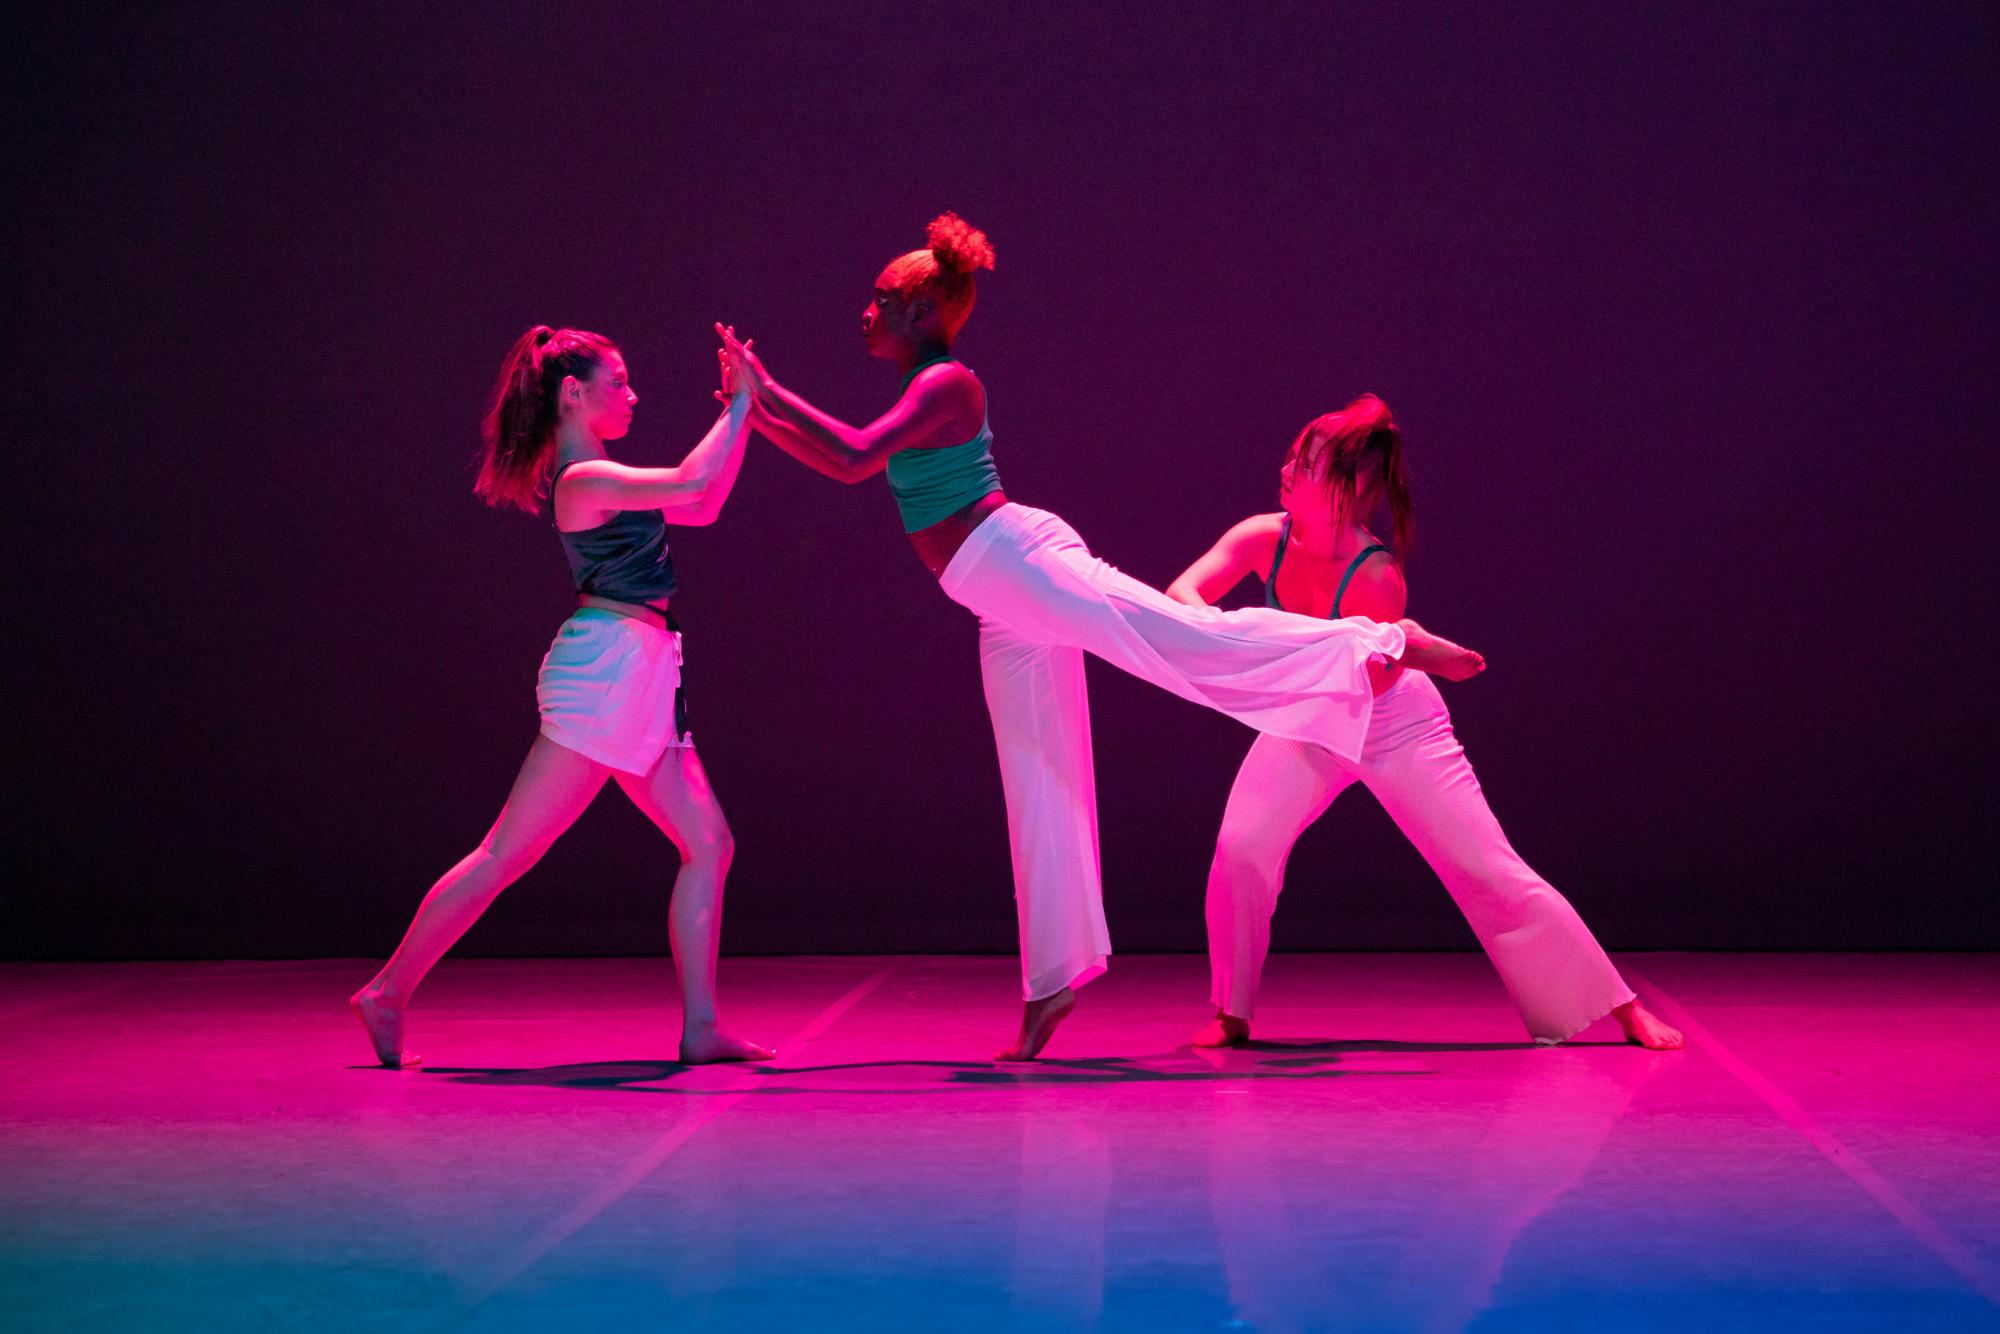 Dancers pose against each other beneath purple lighting